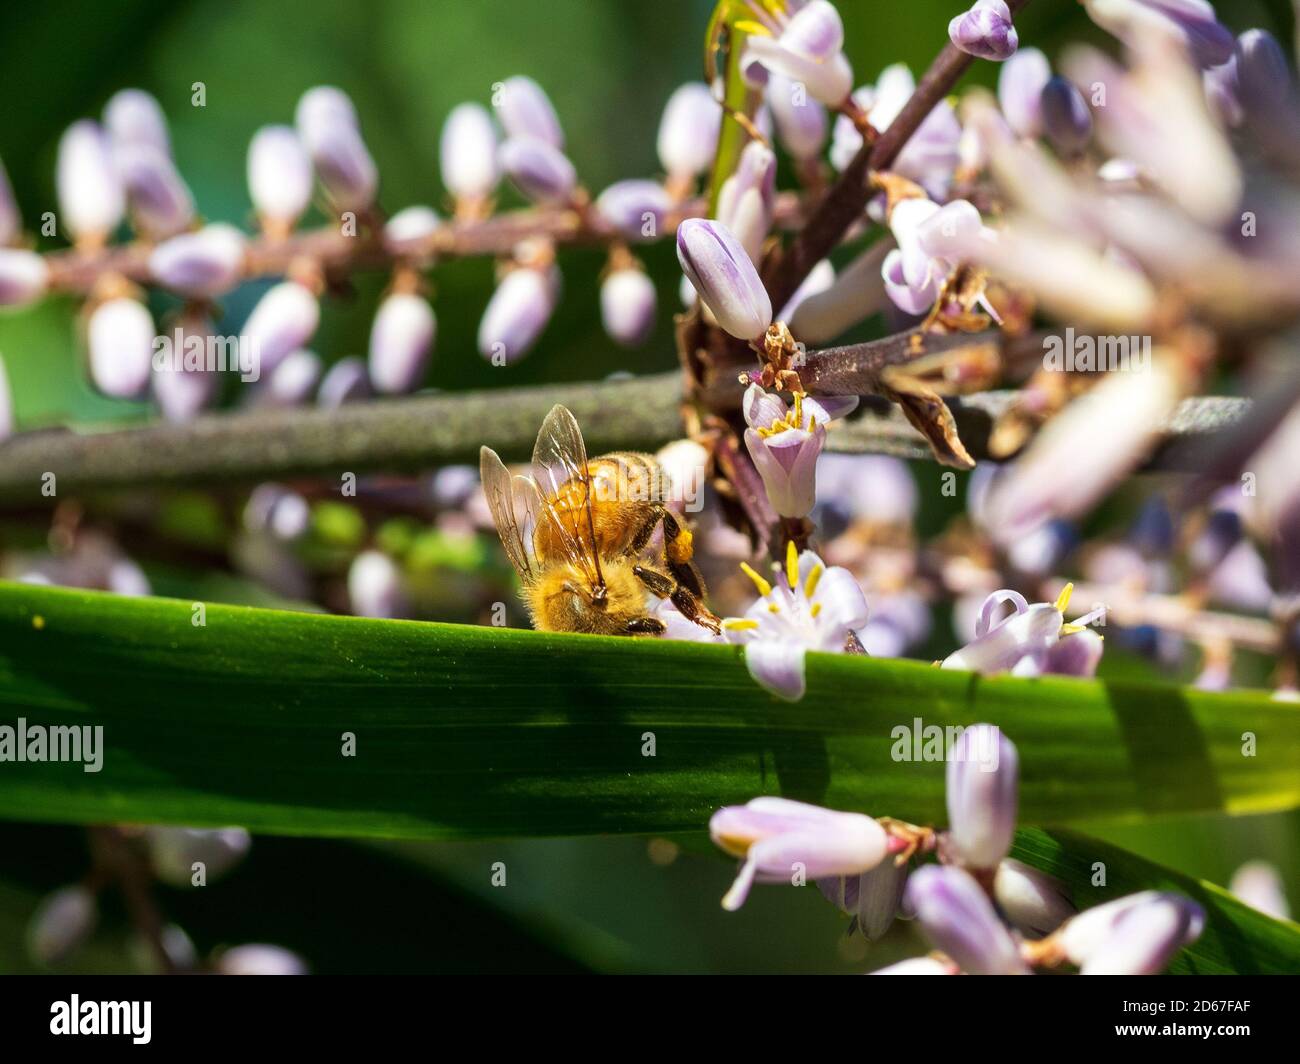 Bees, A funny closeup of a fuzzy golden Bee upside-down standing on it's head inside on a long green leaf amongst small pretty Mauve purple flowers Stock Photo